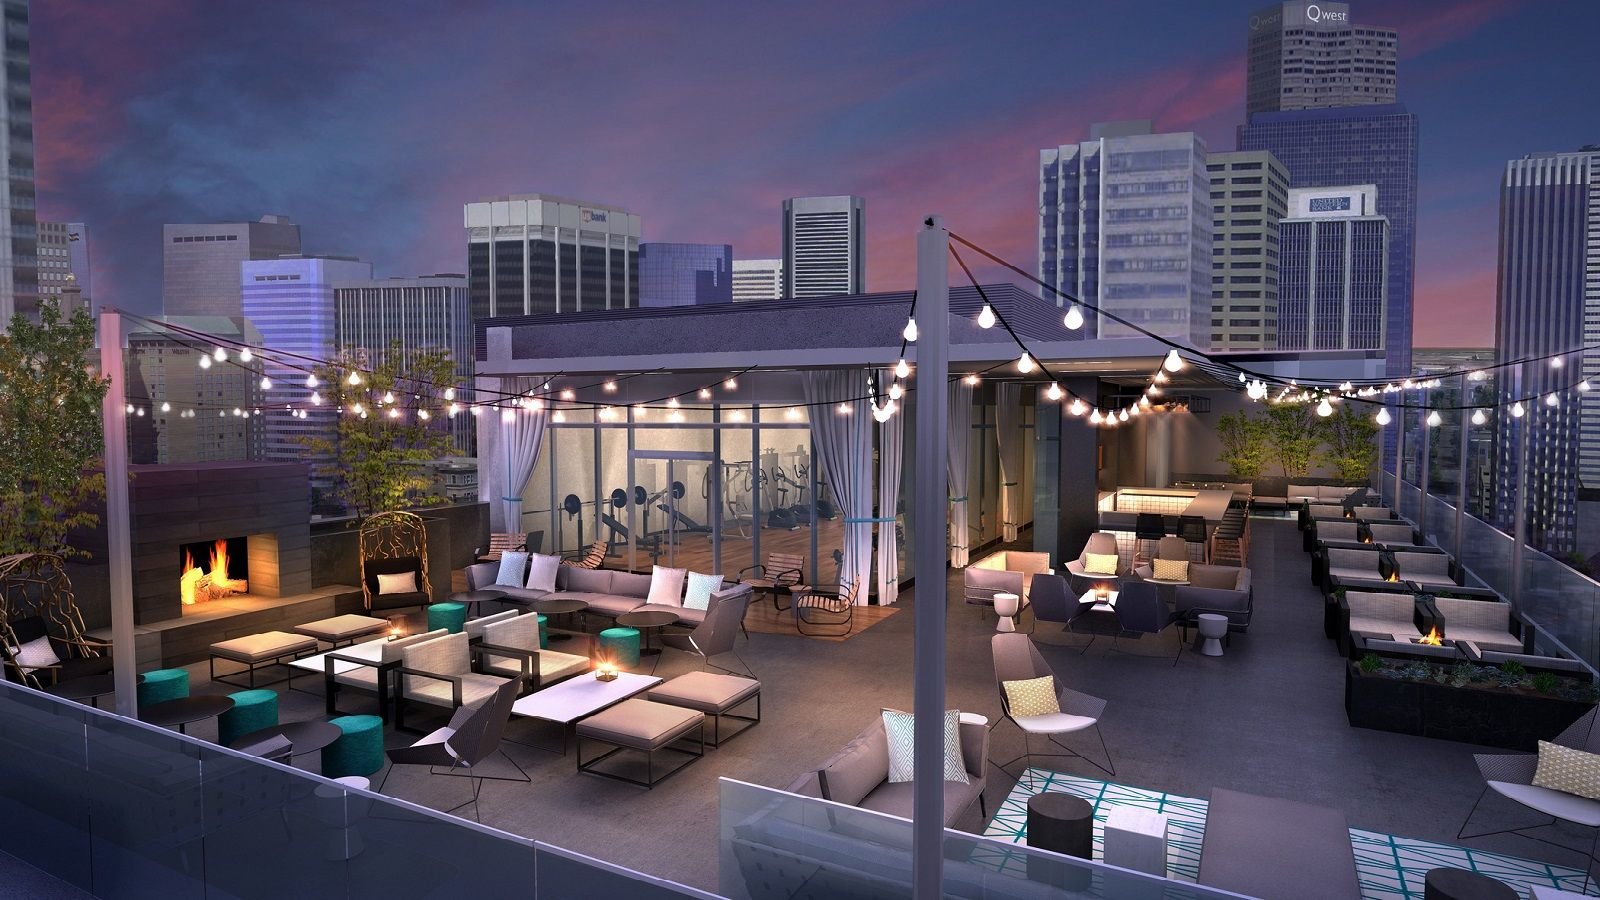 White Lodgings rooftop space at Le Mridien Denver Downtown 54thirty is temporarily closed for renovations